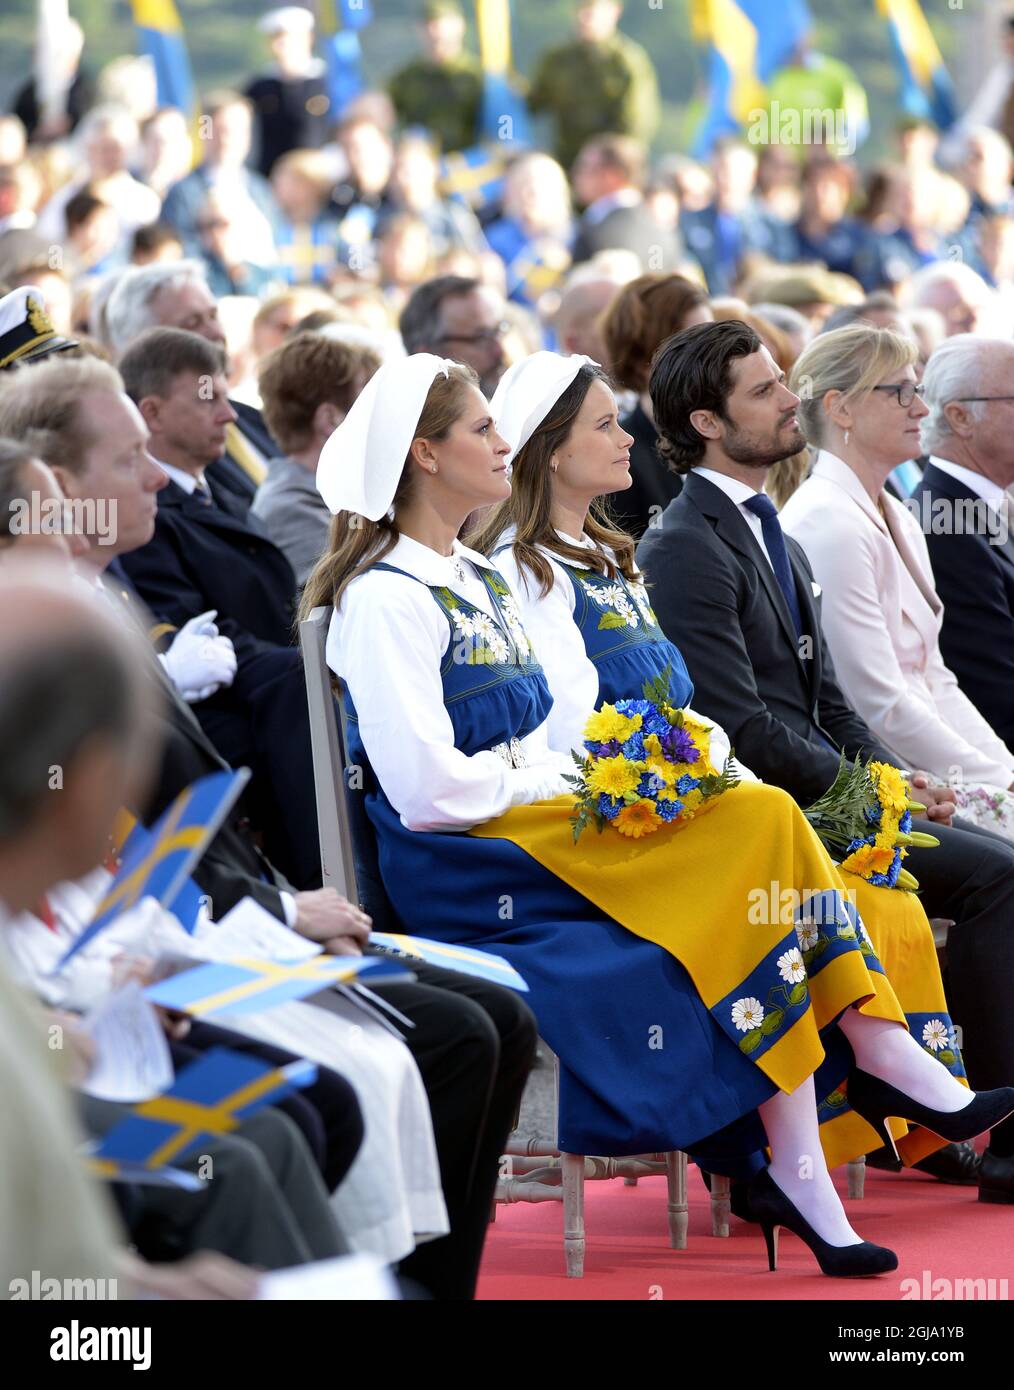 STOCKHOLM 2016-06-06 Princess Madeleine, Princess Sofia and Prince Carl Philip during the official National Day of Sweden celebrations at the Skansen open-air museum in Stockholm, Sweden, June 6, 2016. Photo: Maja Suslin / TT / Code 10300 ** SWEDEN OUT ** Stock Photo